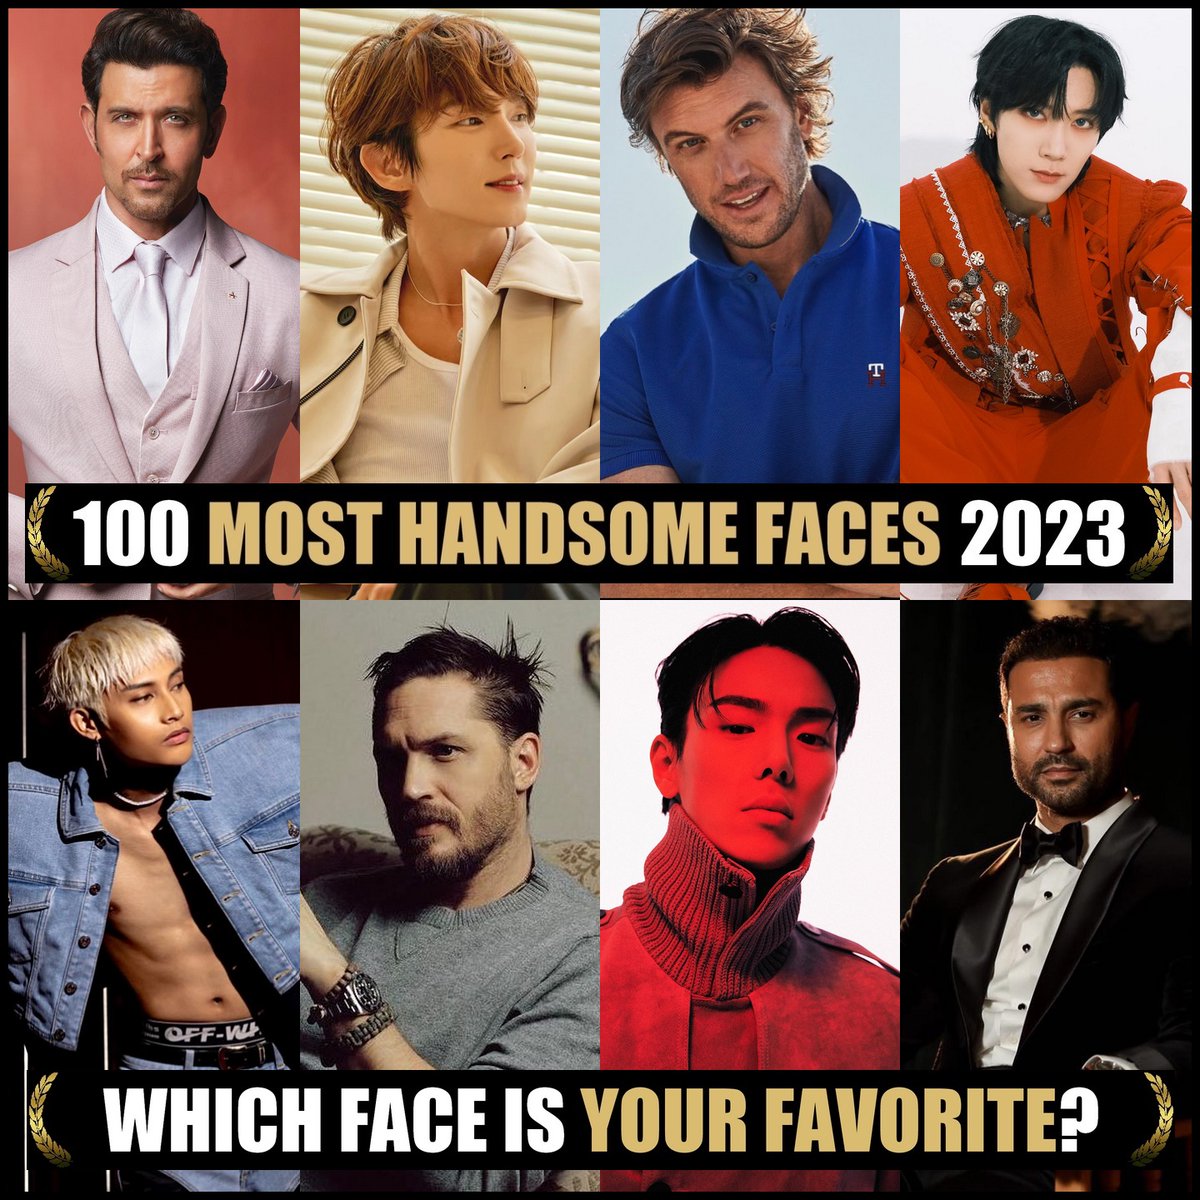 Nominations: 100 Most Handsome Faces 2023. Congrats! Would you like to nominate & vote? Please join our Patreon (Link in Bio) #TCCandler #100faces2023 #HrithikRoshan #LeeJoonGi #adamdemos #ten #nct #wayv #KENSUSON #SB19 #tomhardy #shownu #monstax #karimfahmy